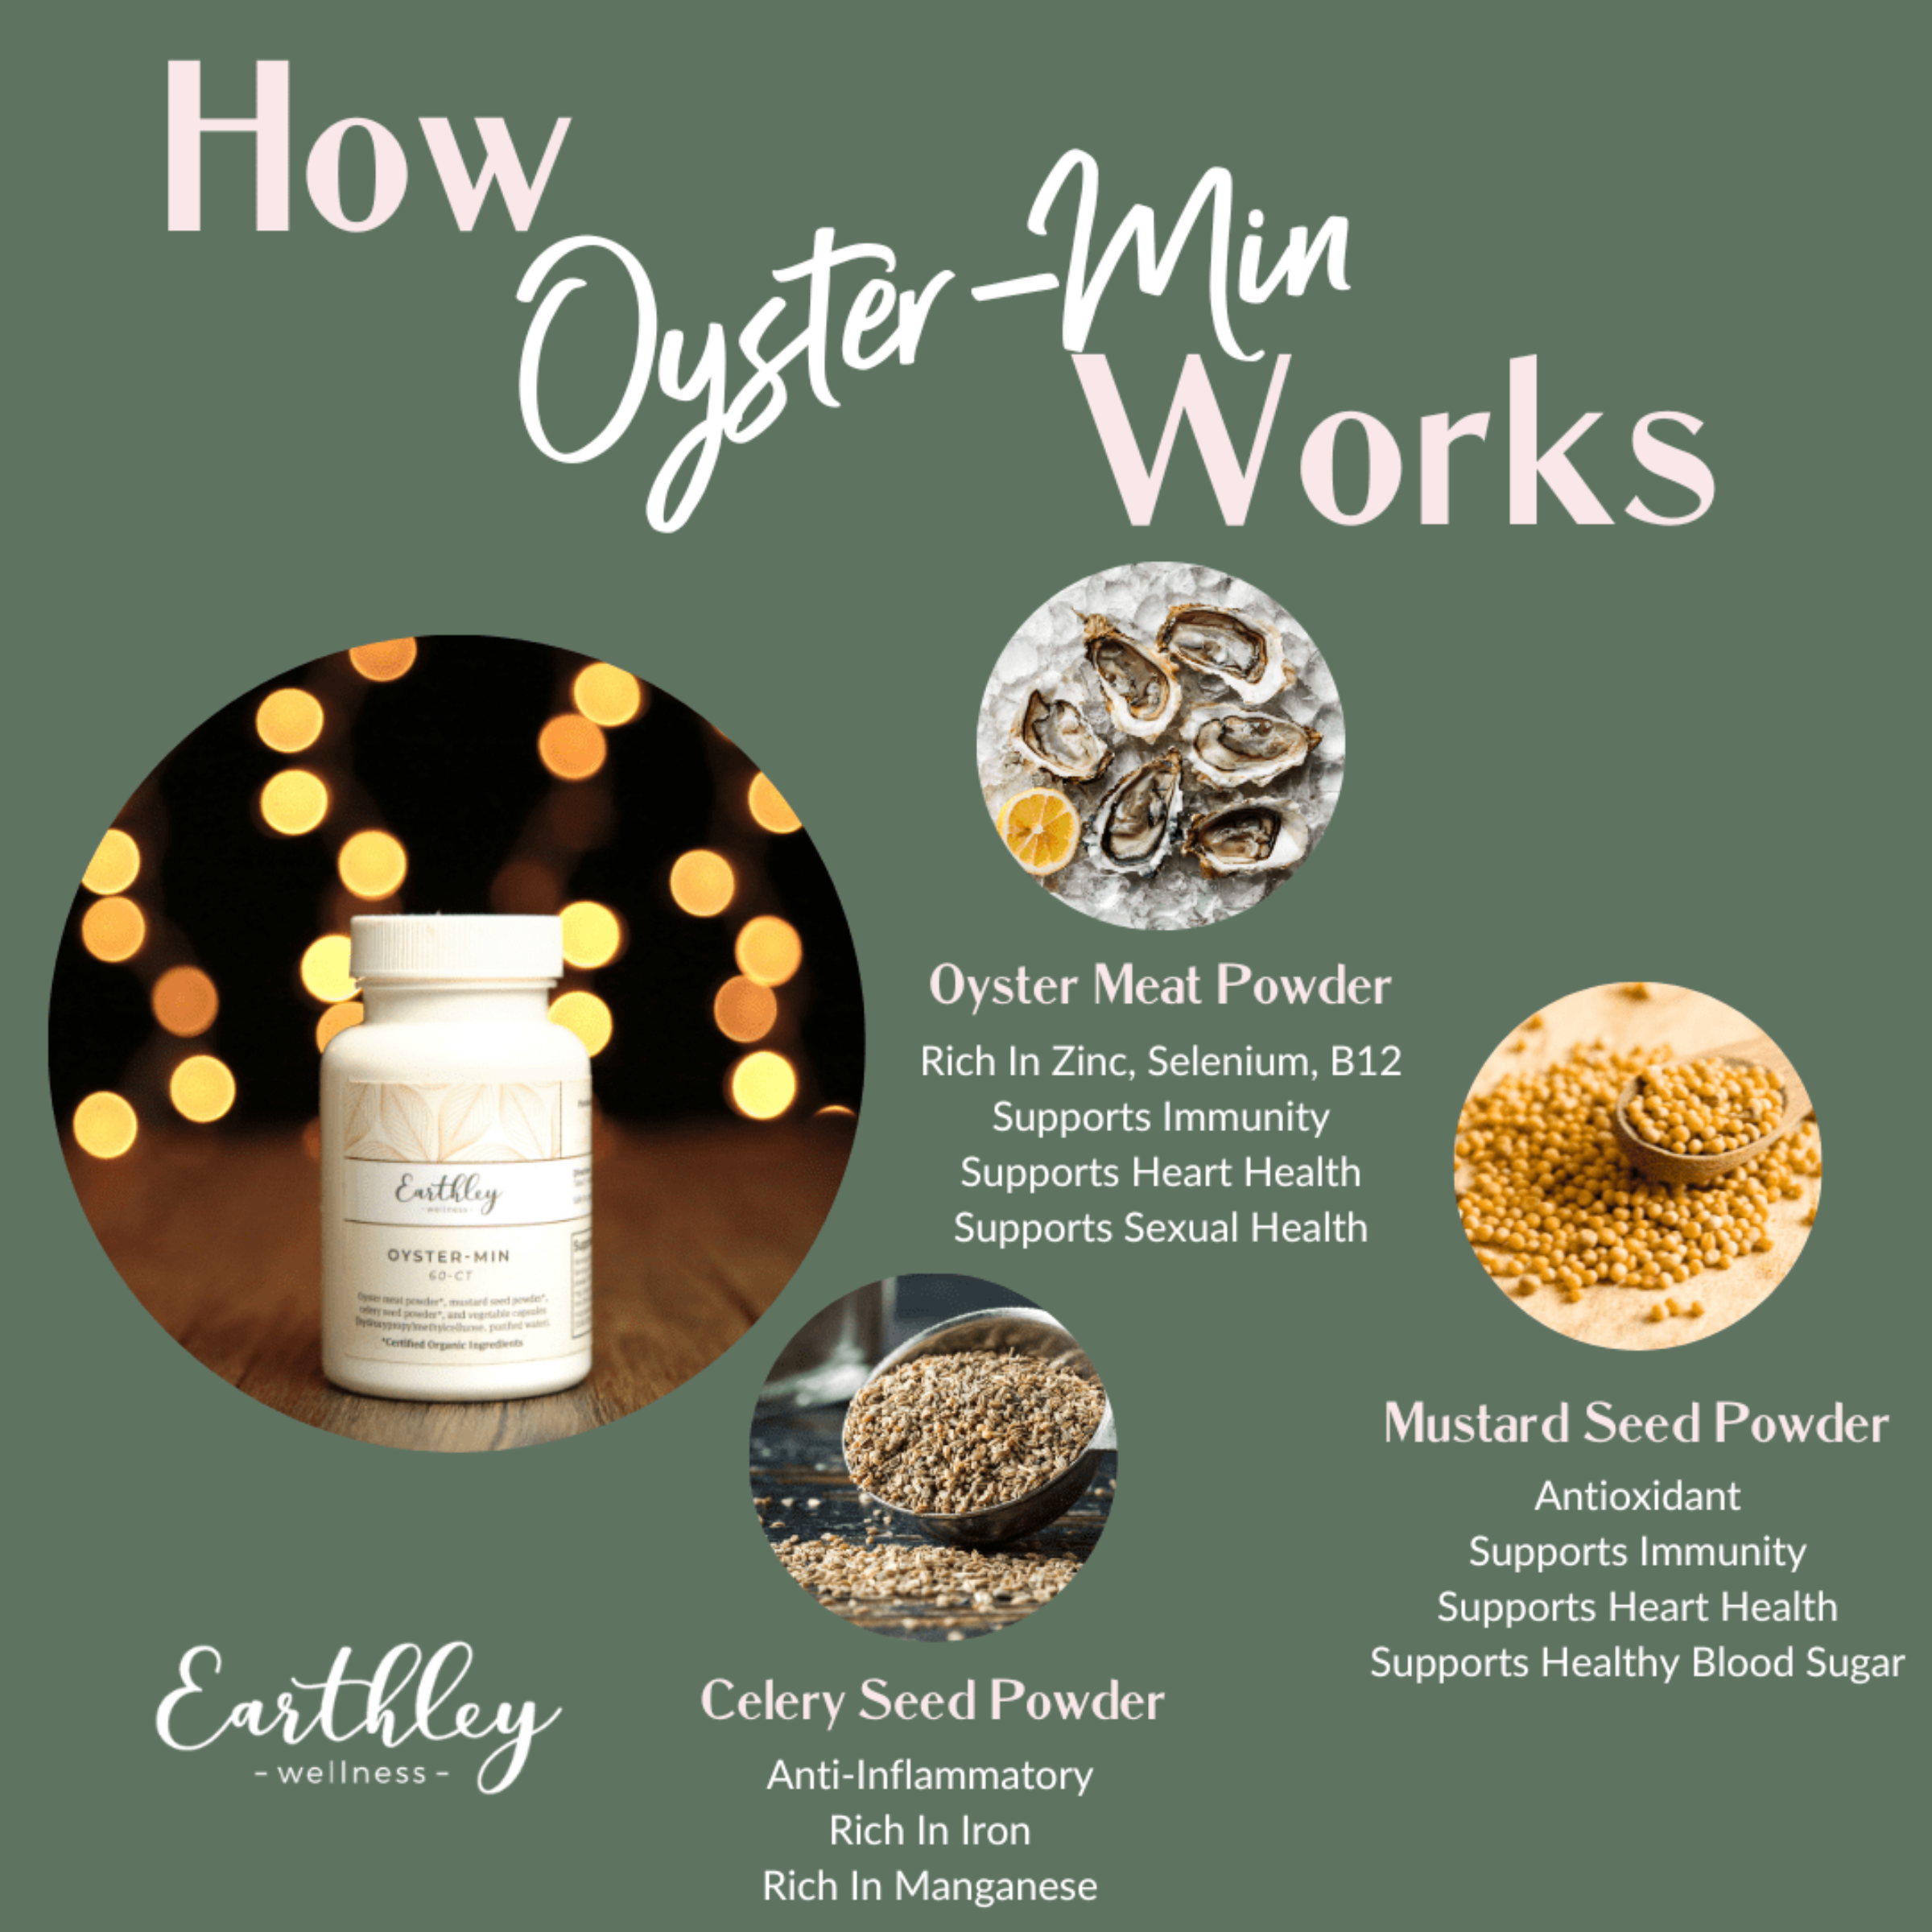 Oyster-Min – For Minerals and Hormone Balance